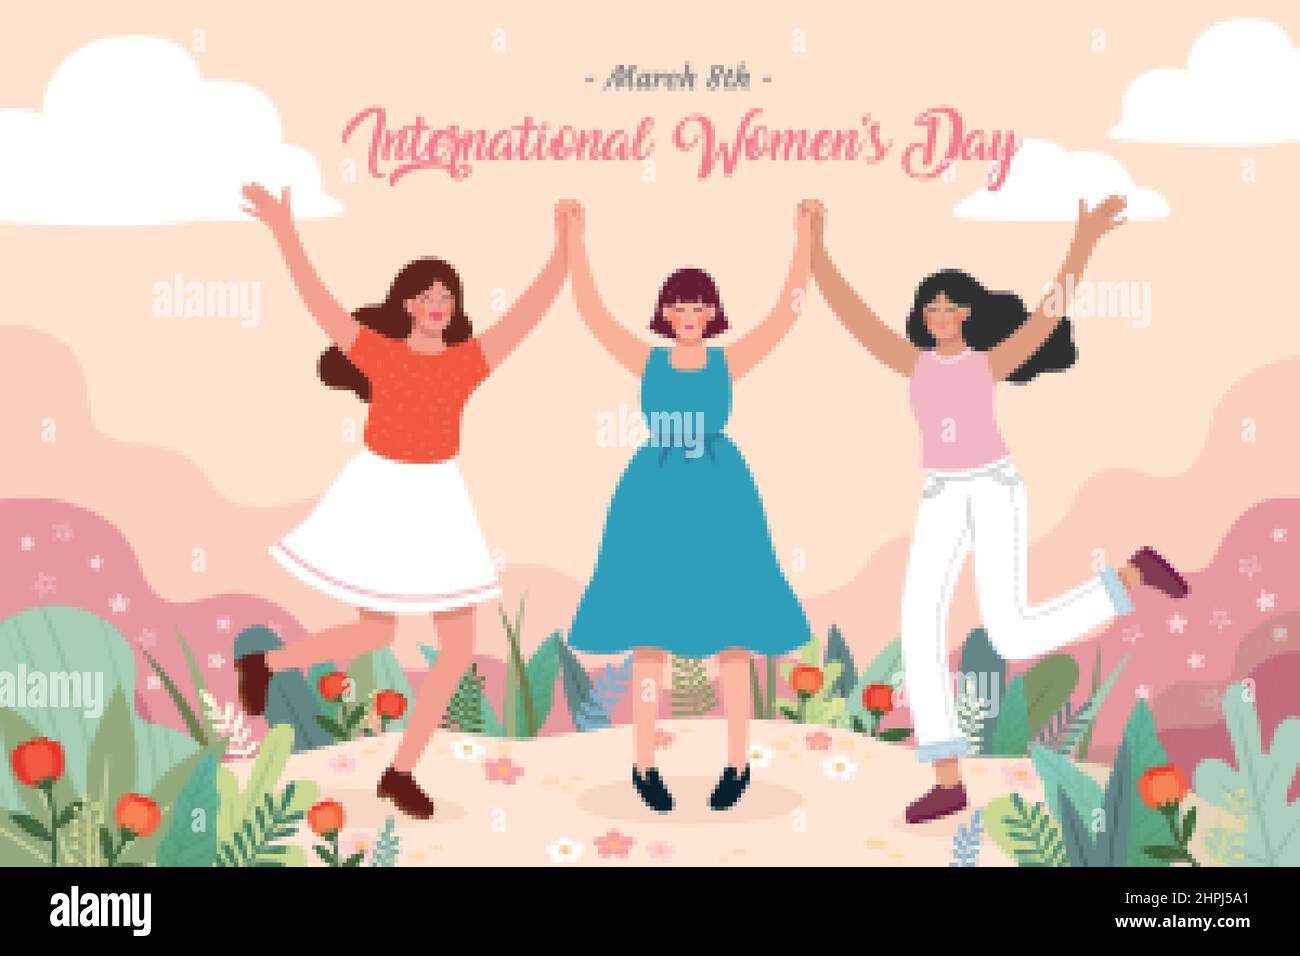 International Women's Day banner. Flat illustration of three women of different races standing in flower garden holding hand in hand happily. Concept Stock Vector